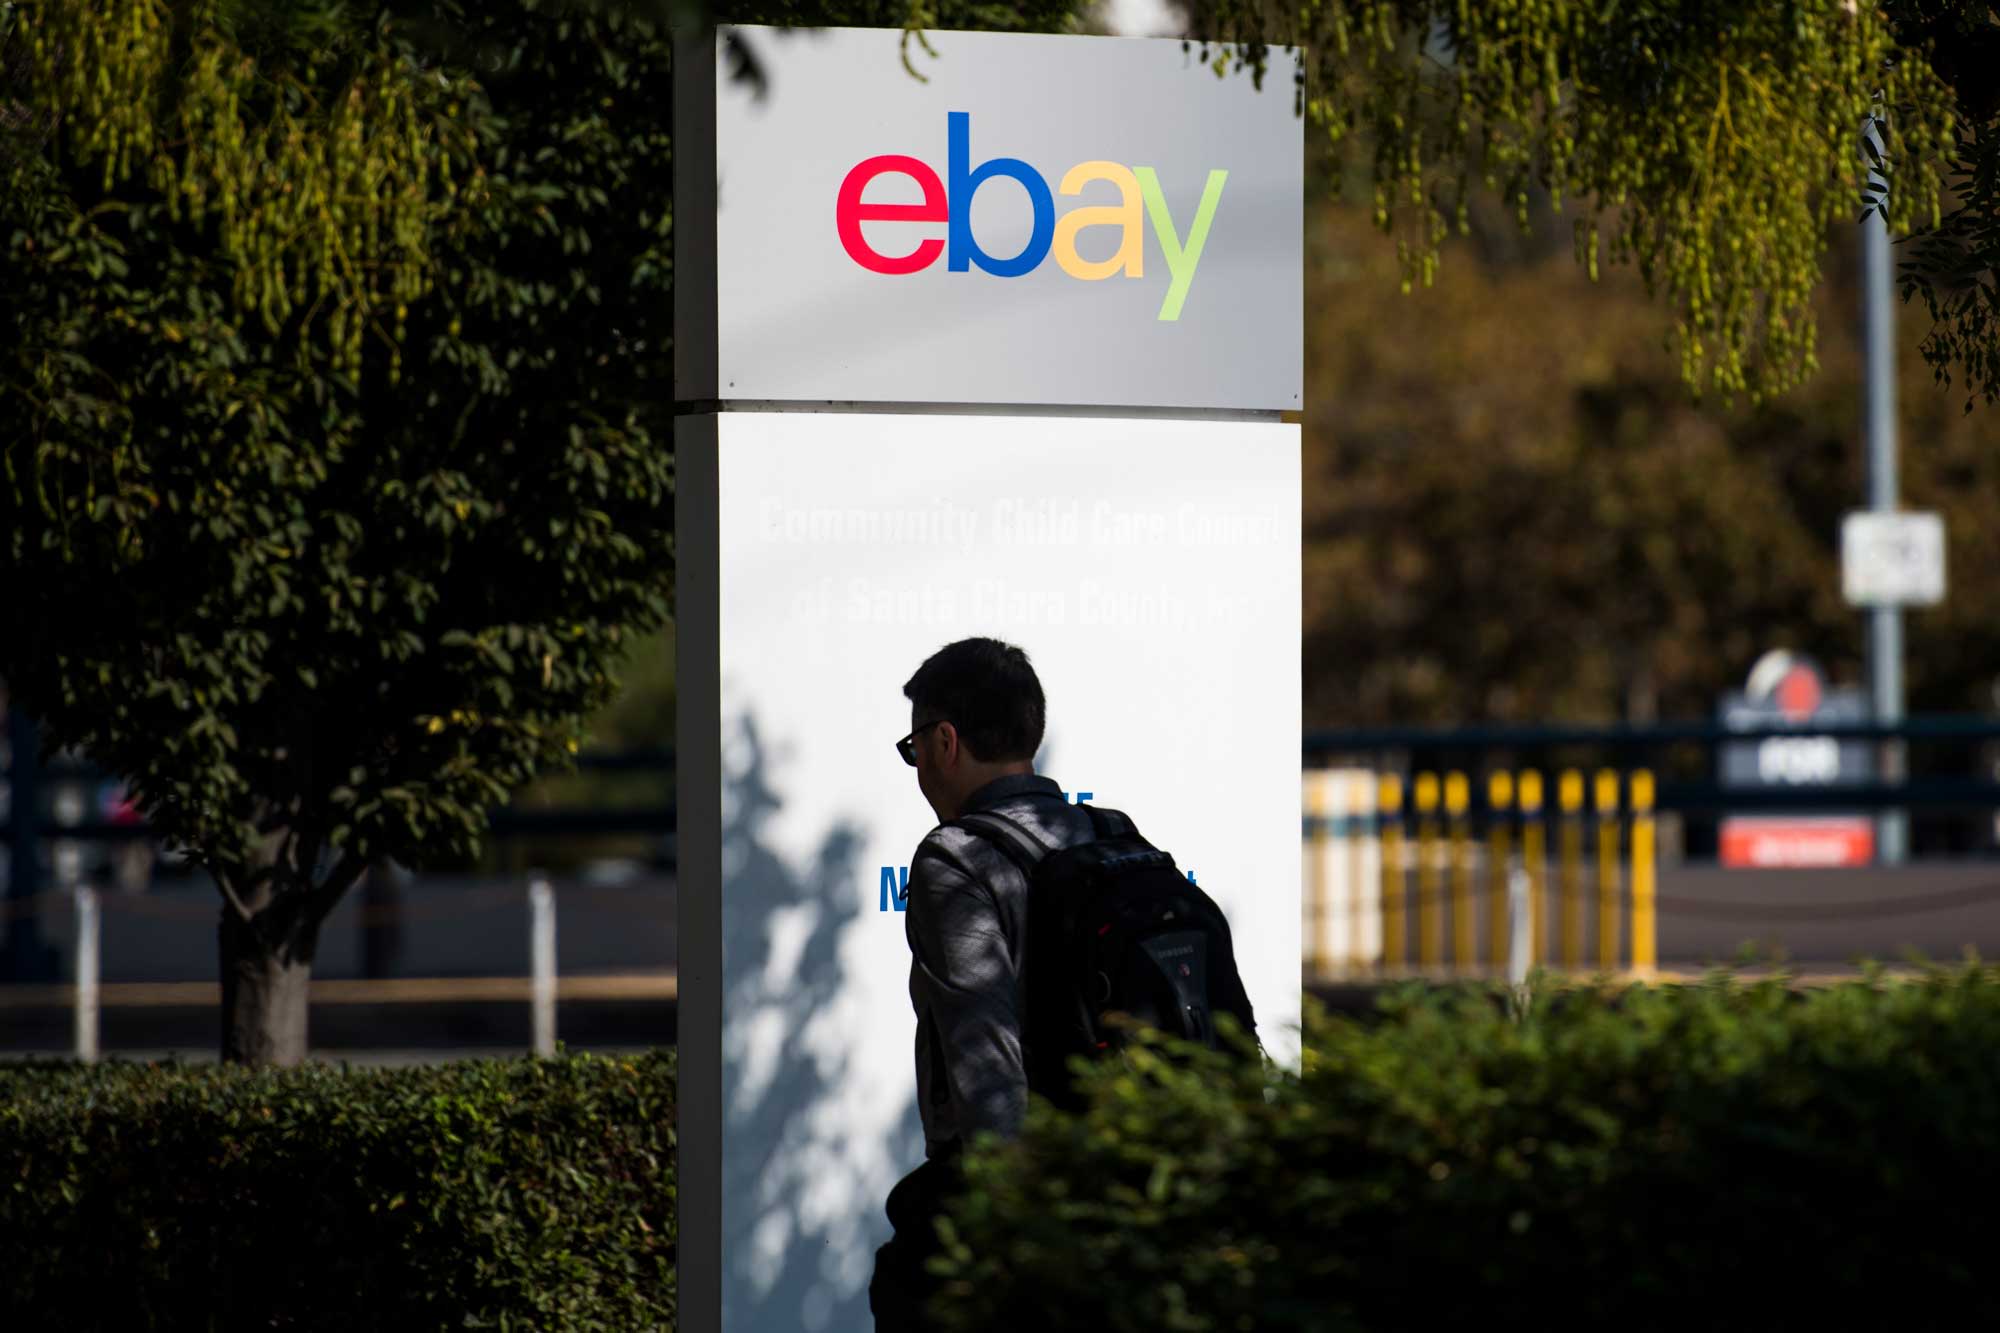 EBay drops more than 11% after giving light earnings guidance - CNBC